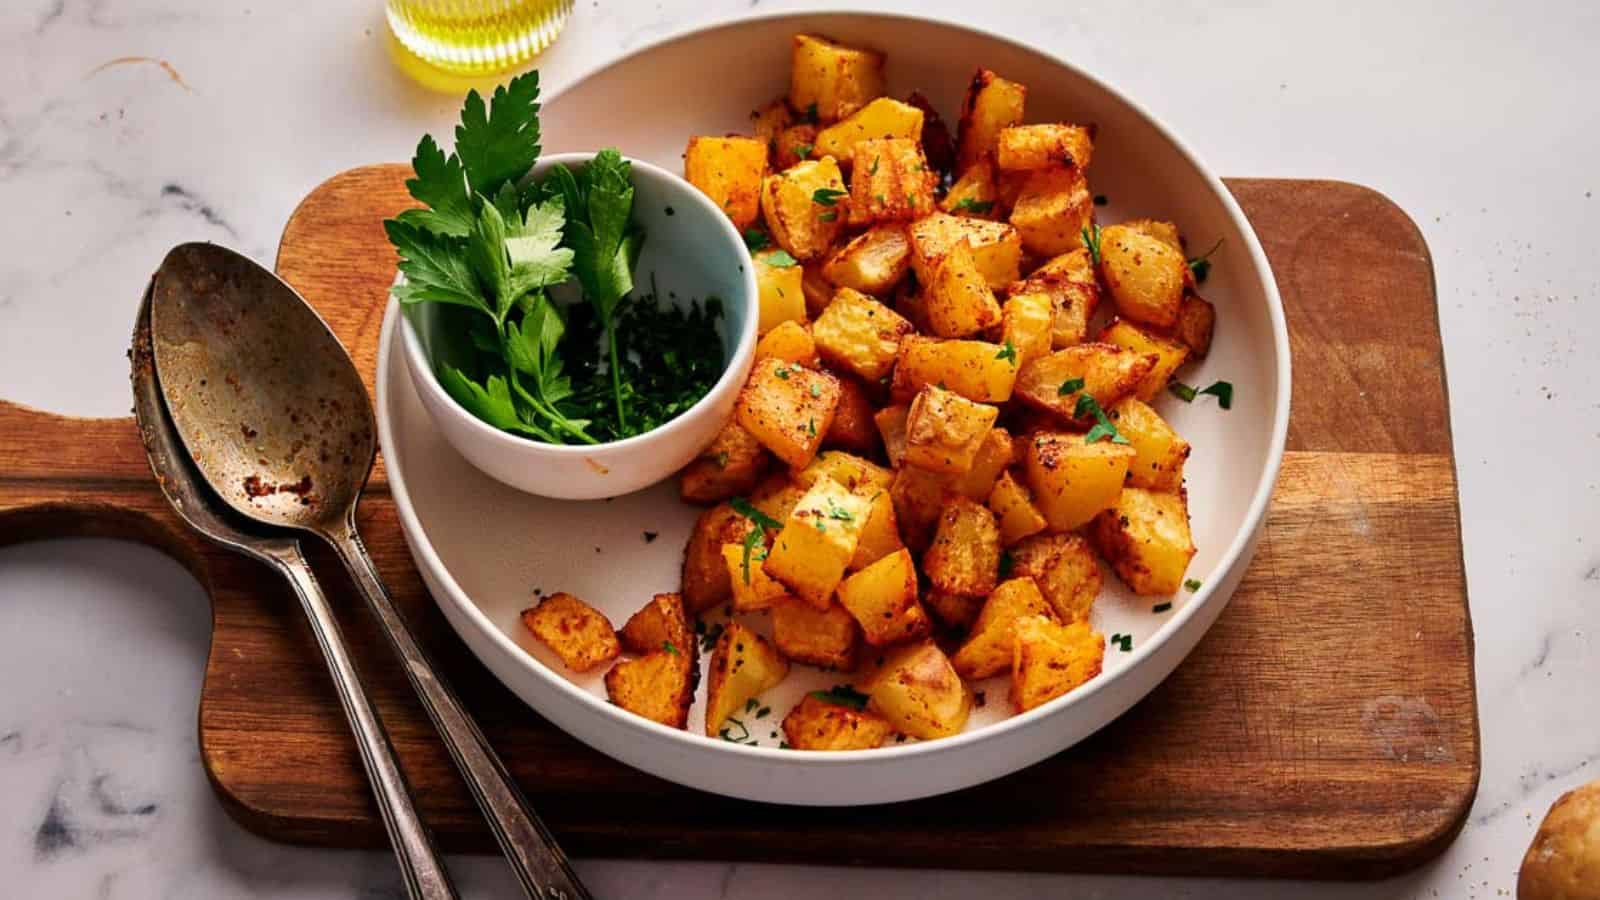 Breakfast potatoes in a serving bowl, with serving spoons and a small bowl of fresh parsley.